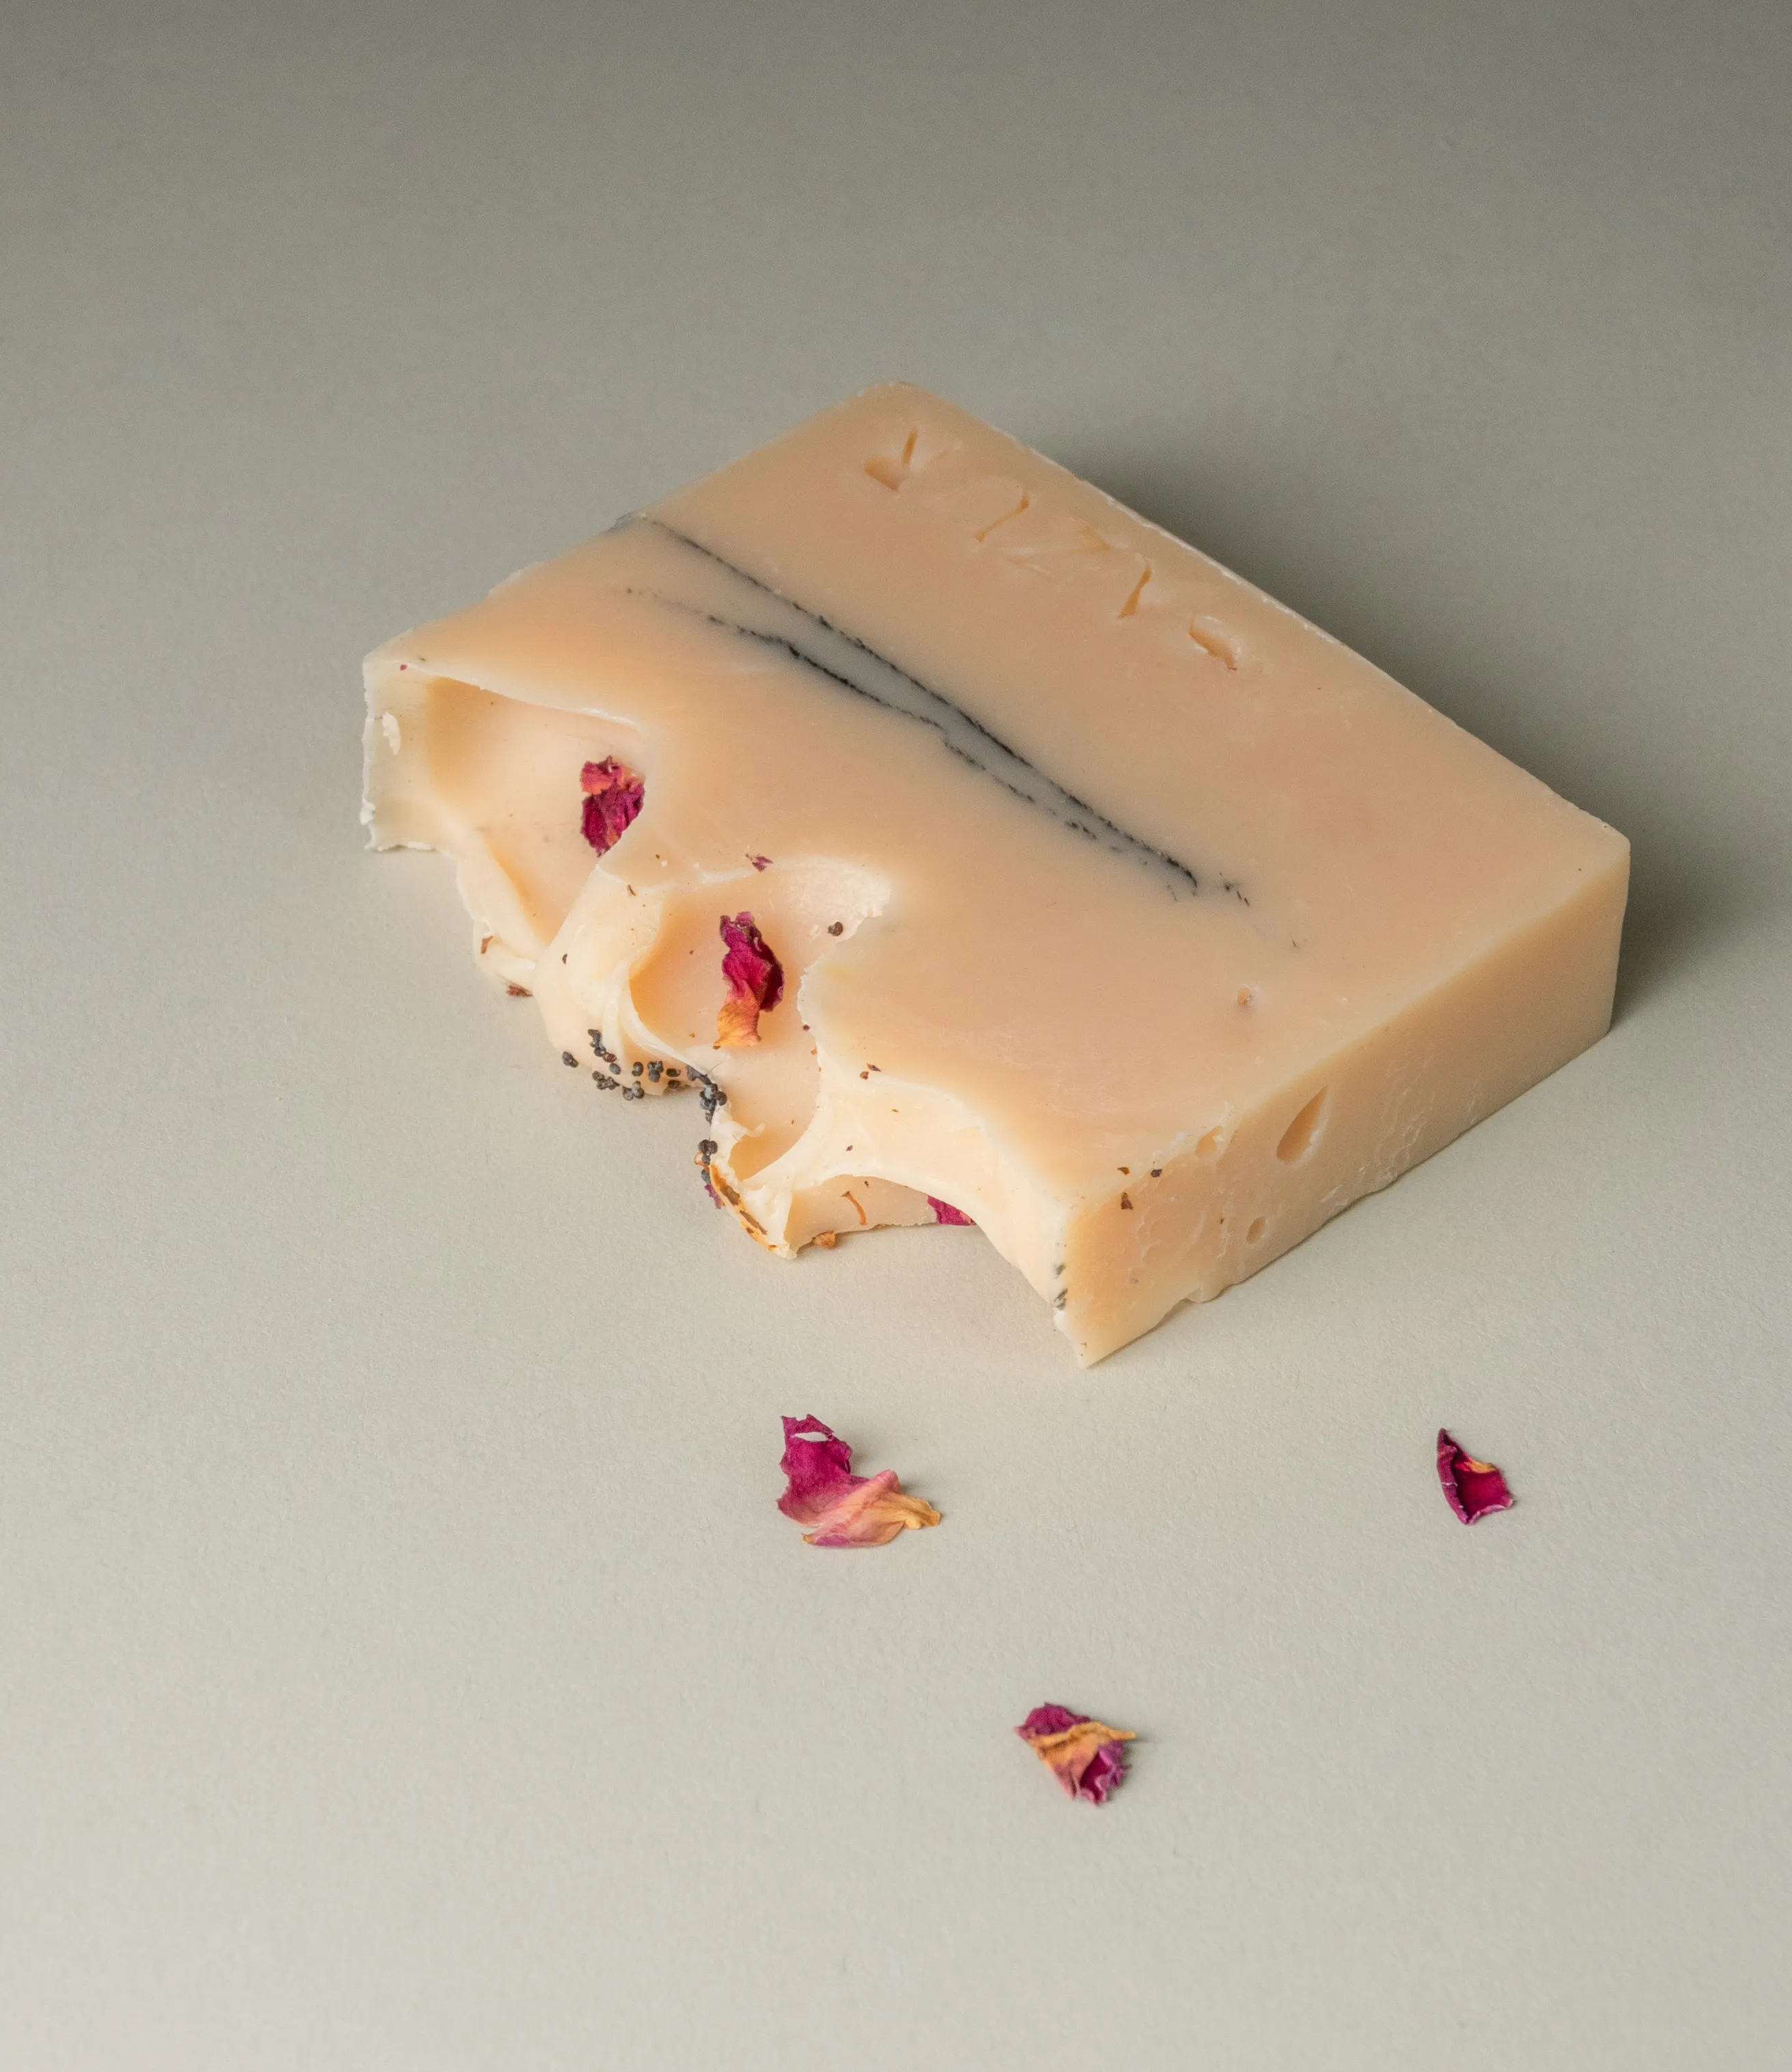 This soap has the scent of Wild Flower and it was crafted by Azur Natural Bodycare. The product merges two colors, light peach and dark grey. The top of the soap looks like the waves of the ocean and is hinted with petals.